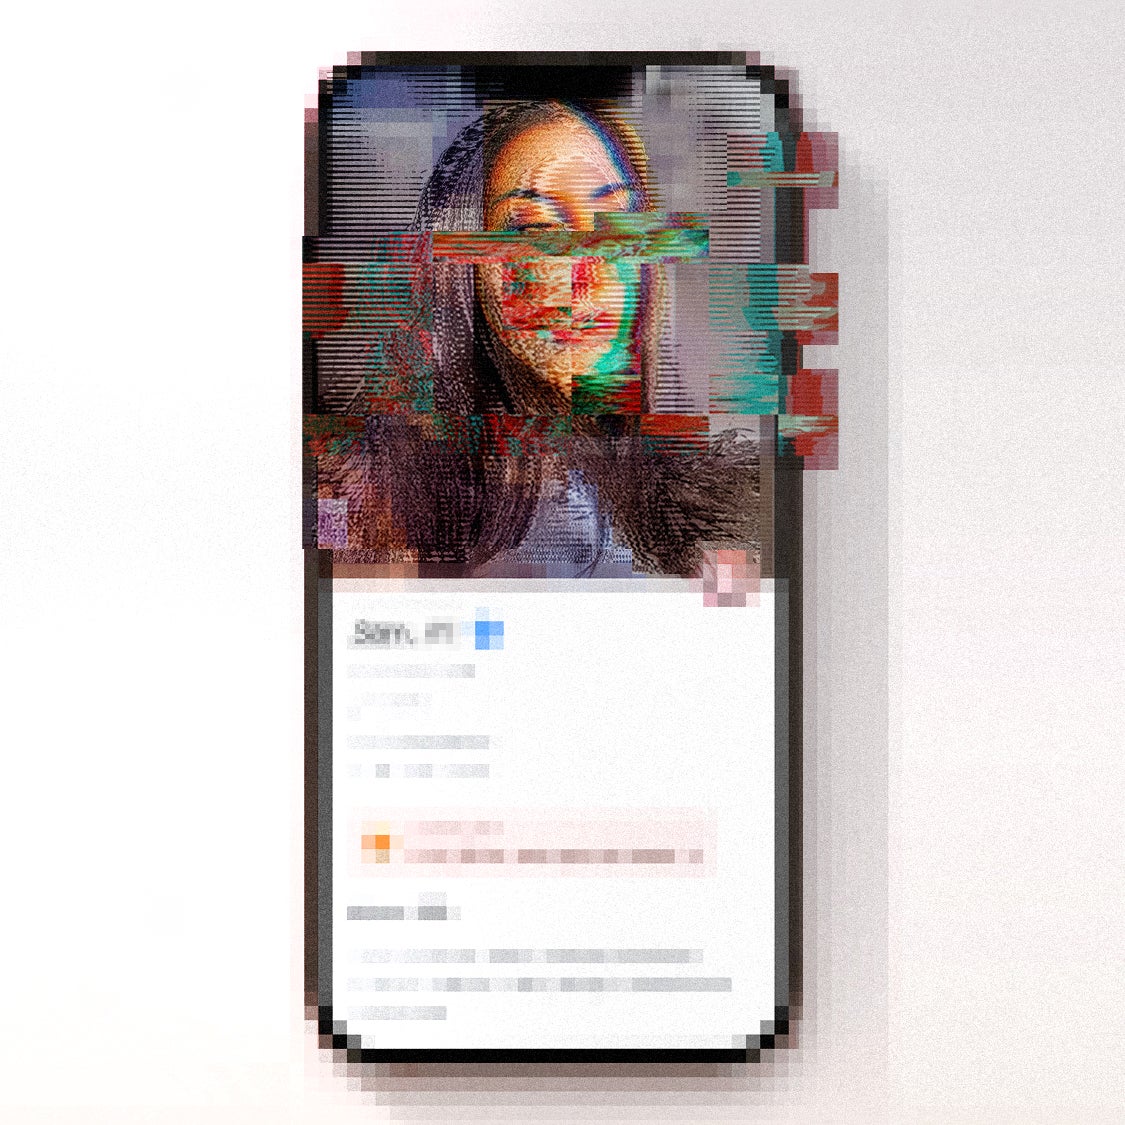 A glitchy cellphone opened to a dating profile.